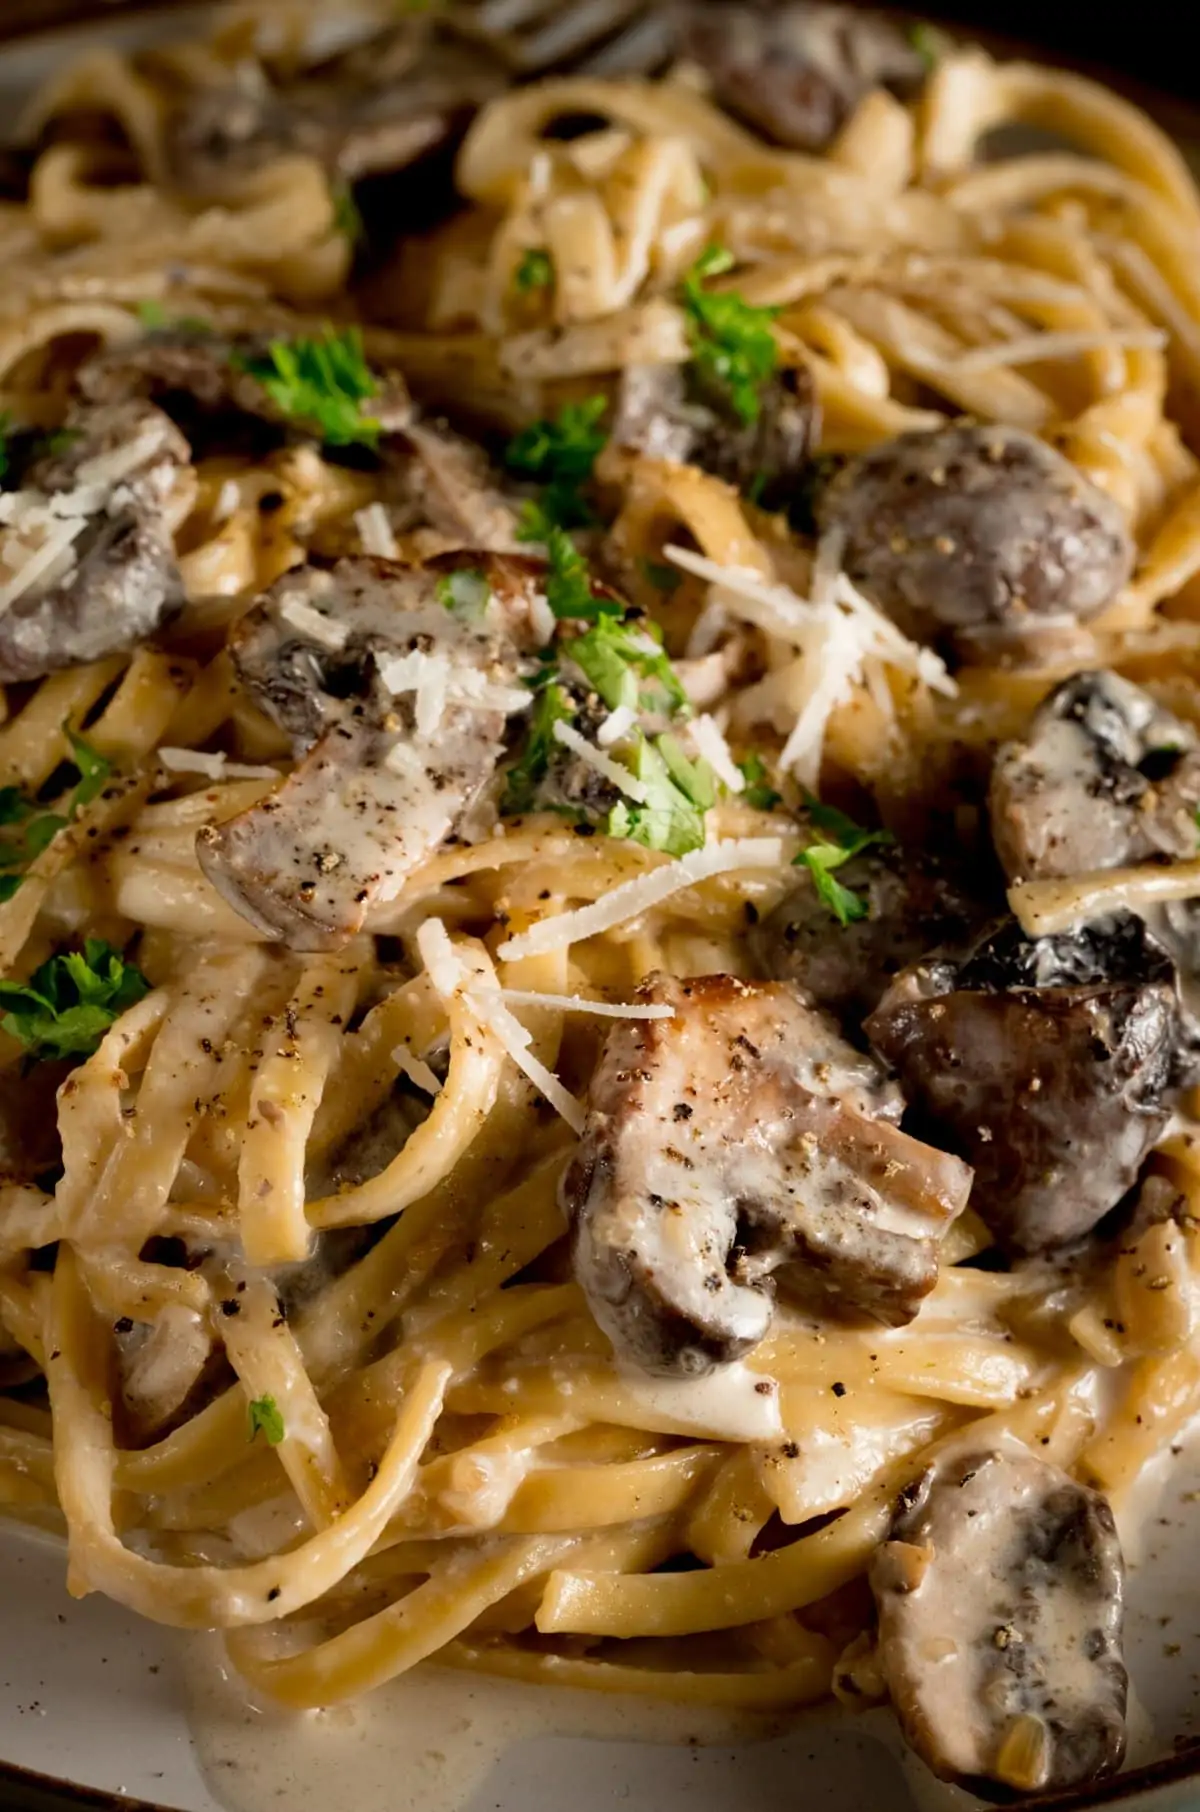 A close up photo of creamy mushroom pasta sprinkled with chopped parsley